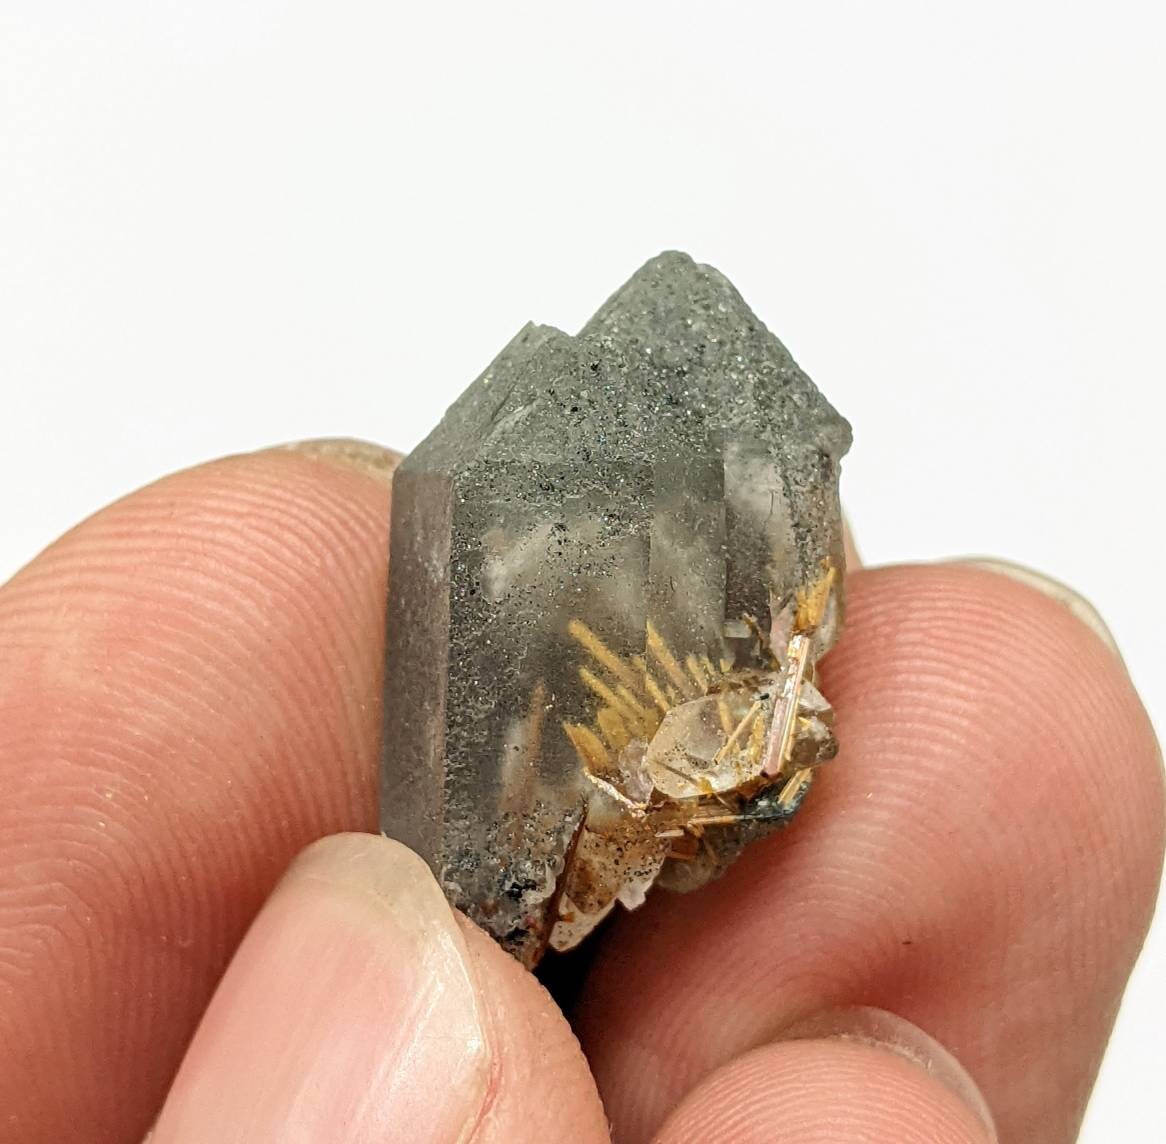 ARSAA GEMS AND MINERALSTwins Sagenite var Rutile included quartz crystal from KP Pakistan, 4.5 grams - Premium  from ARSAA GEMS AND MINERALS - Just $25.00! Shop now at ARSAA GEMS AND MINERALS